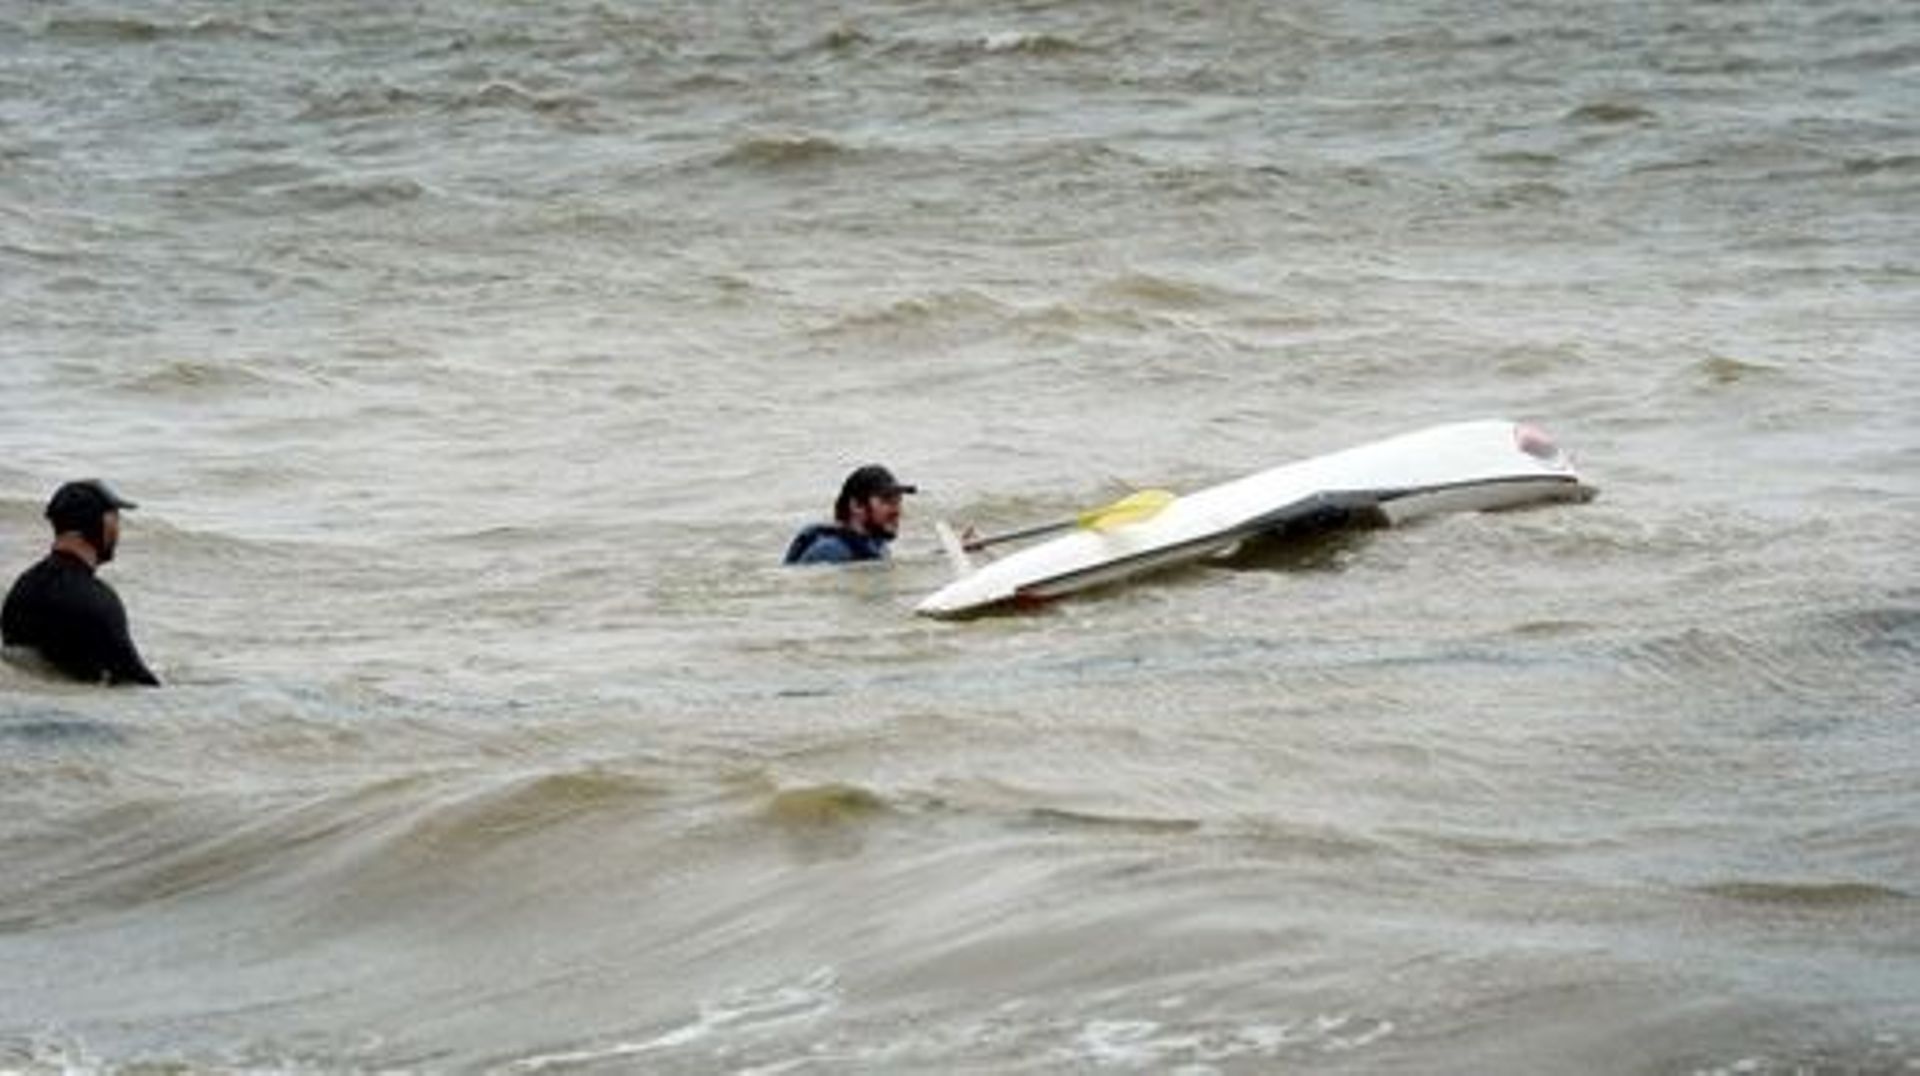 Two men are seen kayaking amid a tropical storm in French Bay, located in the Auckland Region of New Zealand’s North Island on February 13, 2023. Thousands of homes in New Zealand were without power and flights were grounded Monday as a tropical storm las